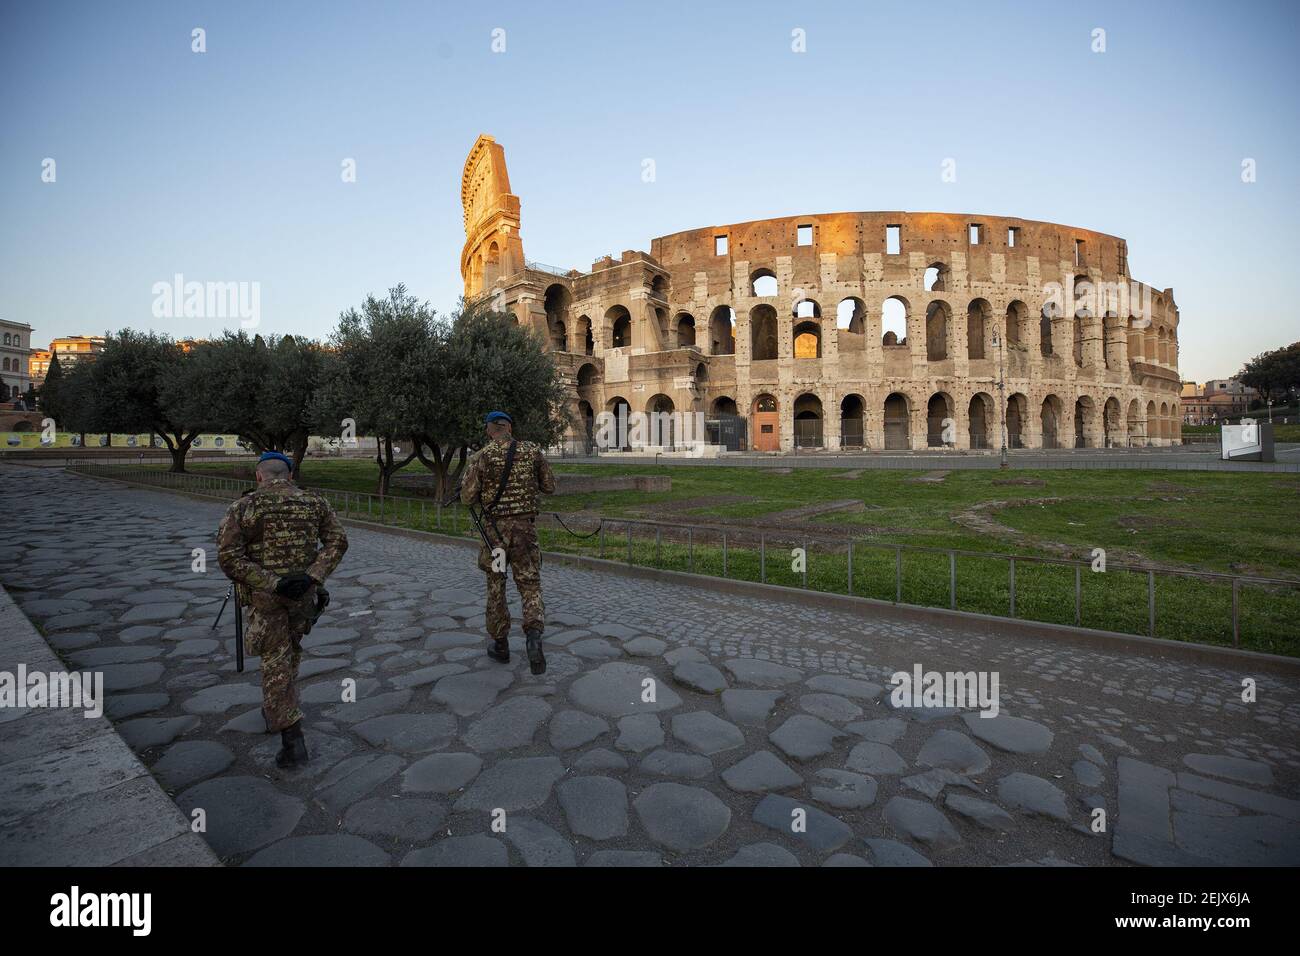 Two soldiers walking in front of the Colosseum in Rome, Italy on March 23, 2020, during the 14th day of lockdown imposed nationwide by the Italian government that tries to tackle the coronavirus outbreak. Every movements in the citiies are restricted, and streets usually filled with life and traffic are almost empty (Photo by Giuseppe Fama/Pacific Press/Sipa USA) Stock Photo